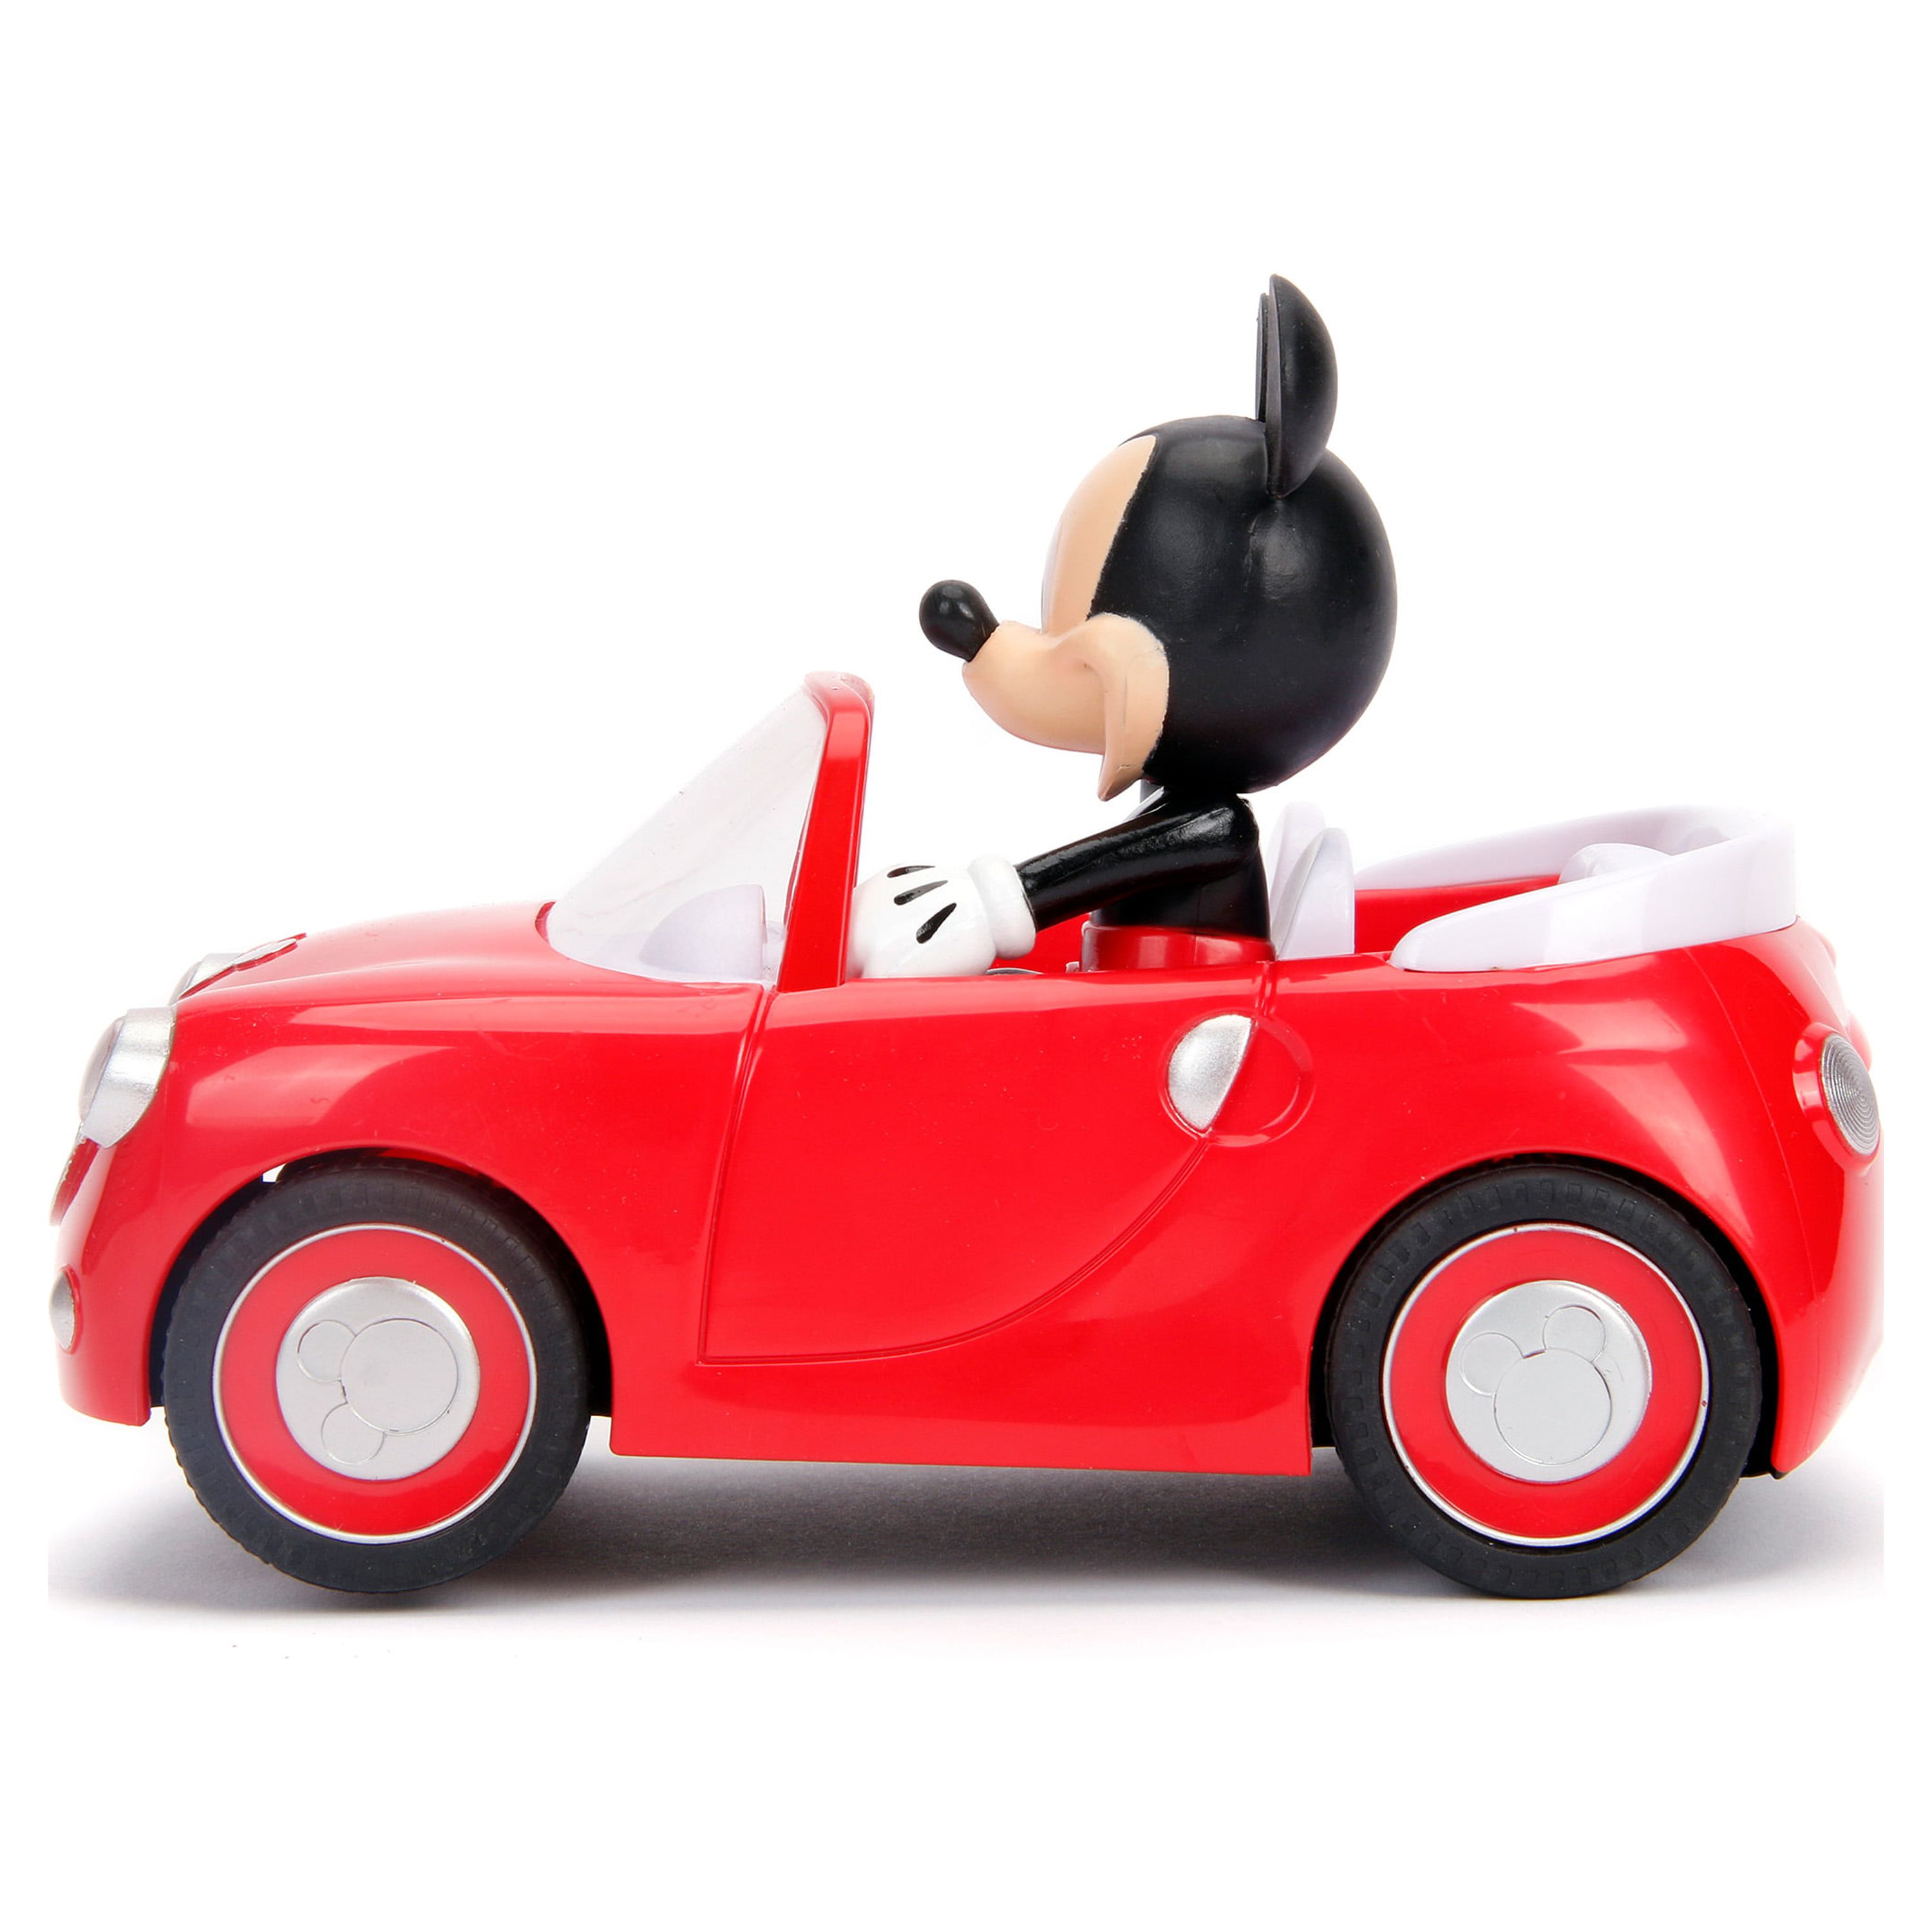 Jada Toys Classic Roadster Mickey Mouse Battery-Powered RC Car(Red) - image 4 of 6